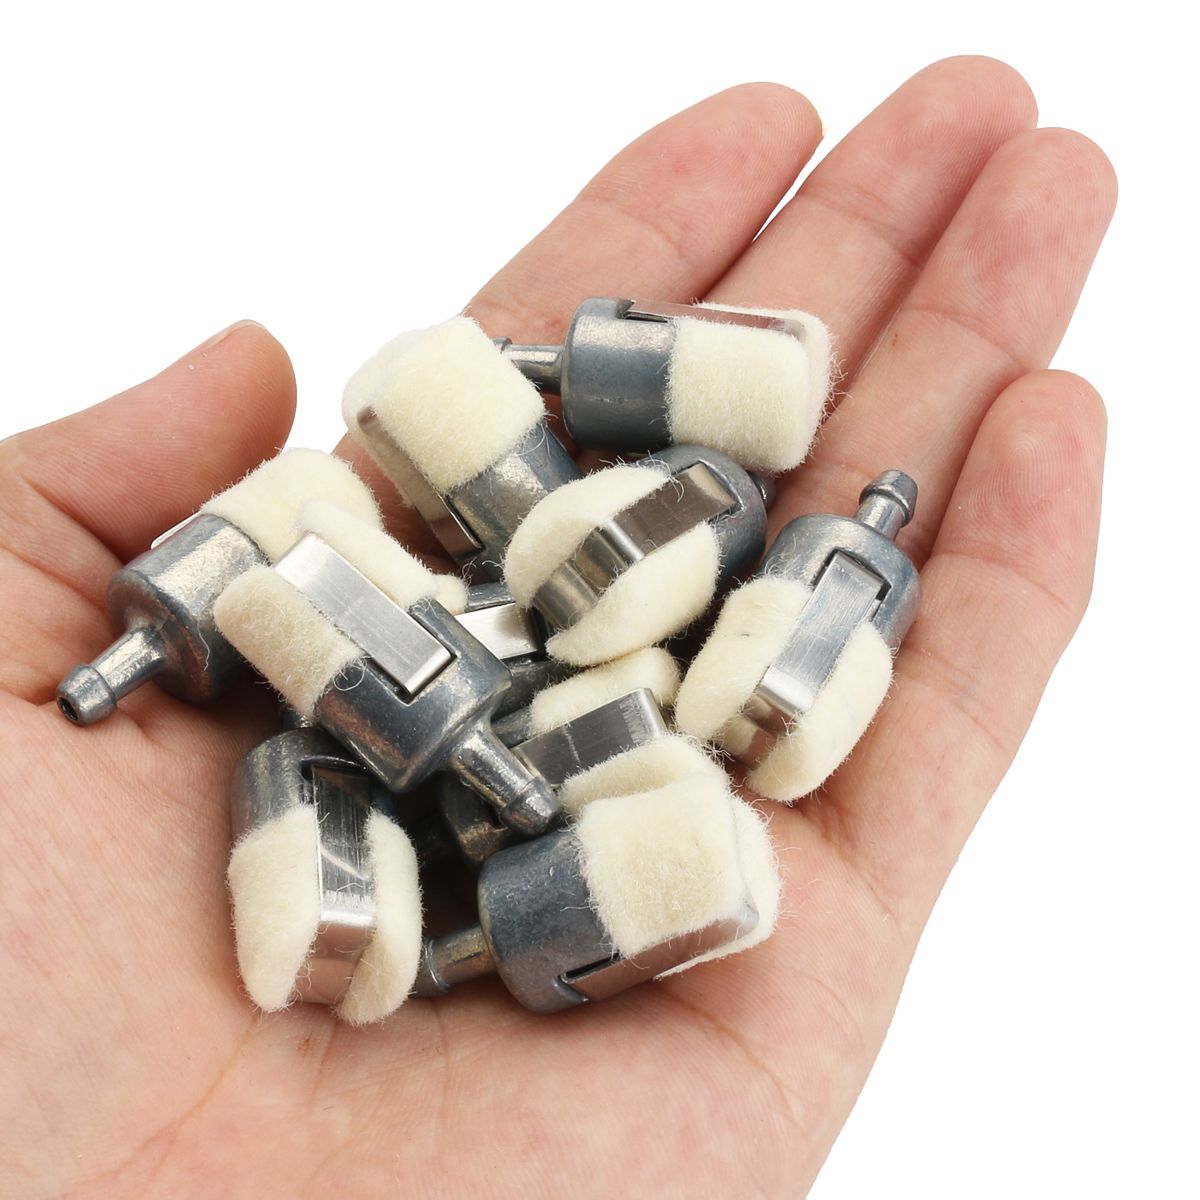 10Pcs-Gas-Fuel-Filter-Pickup-Replacement-Fit-for-Homelite-Echo-Husqvarna-Stihl-Pouland-Chainsaws-1319153